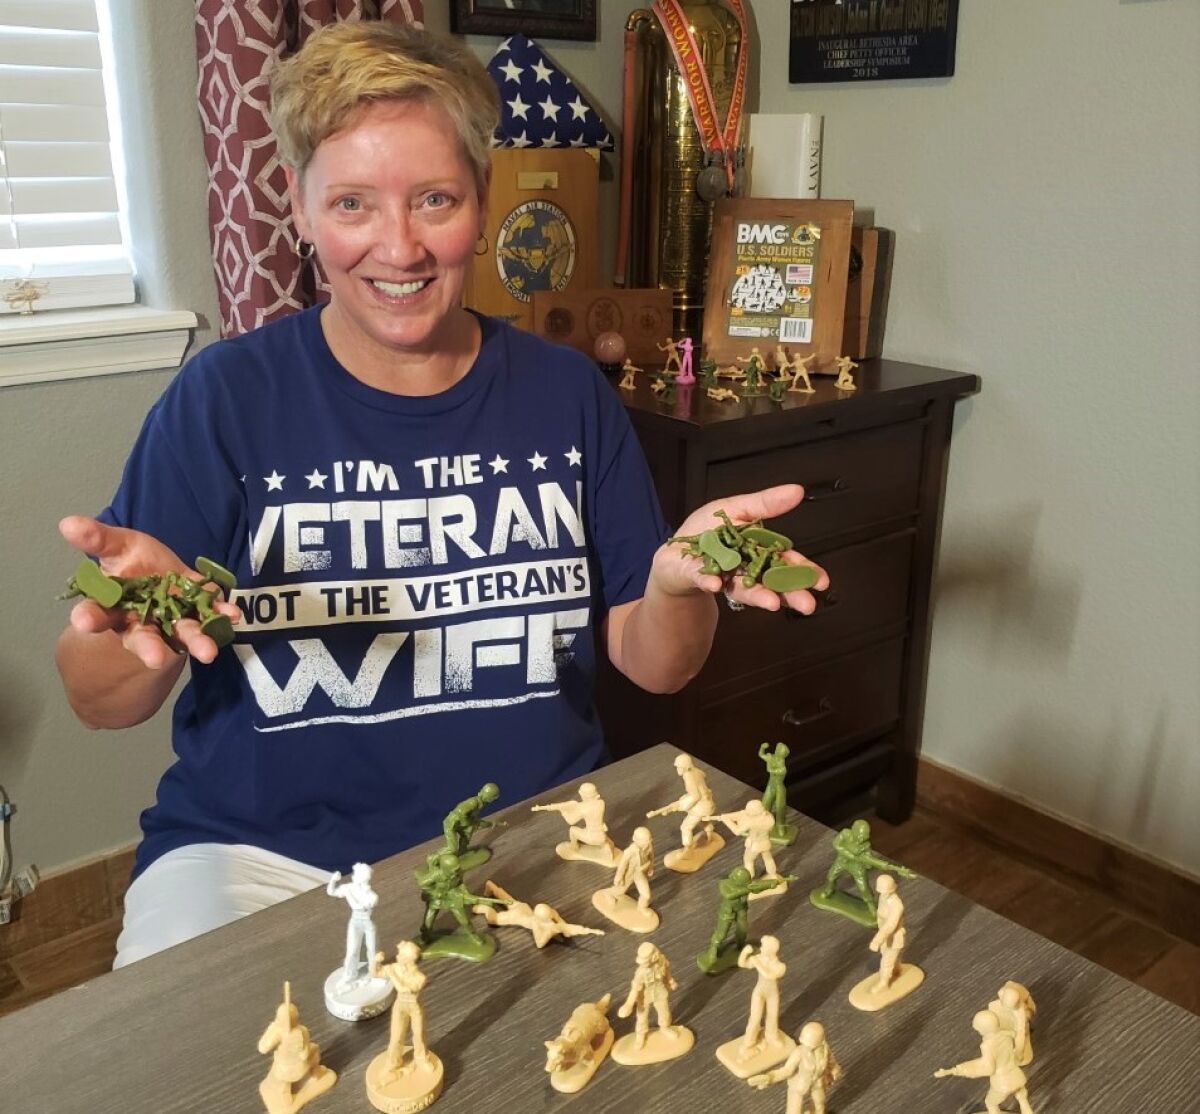 JoAnn Ortloff, proudly wearing her T-shirt, displays the first female toy soldiers by BMC Toys.